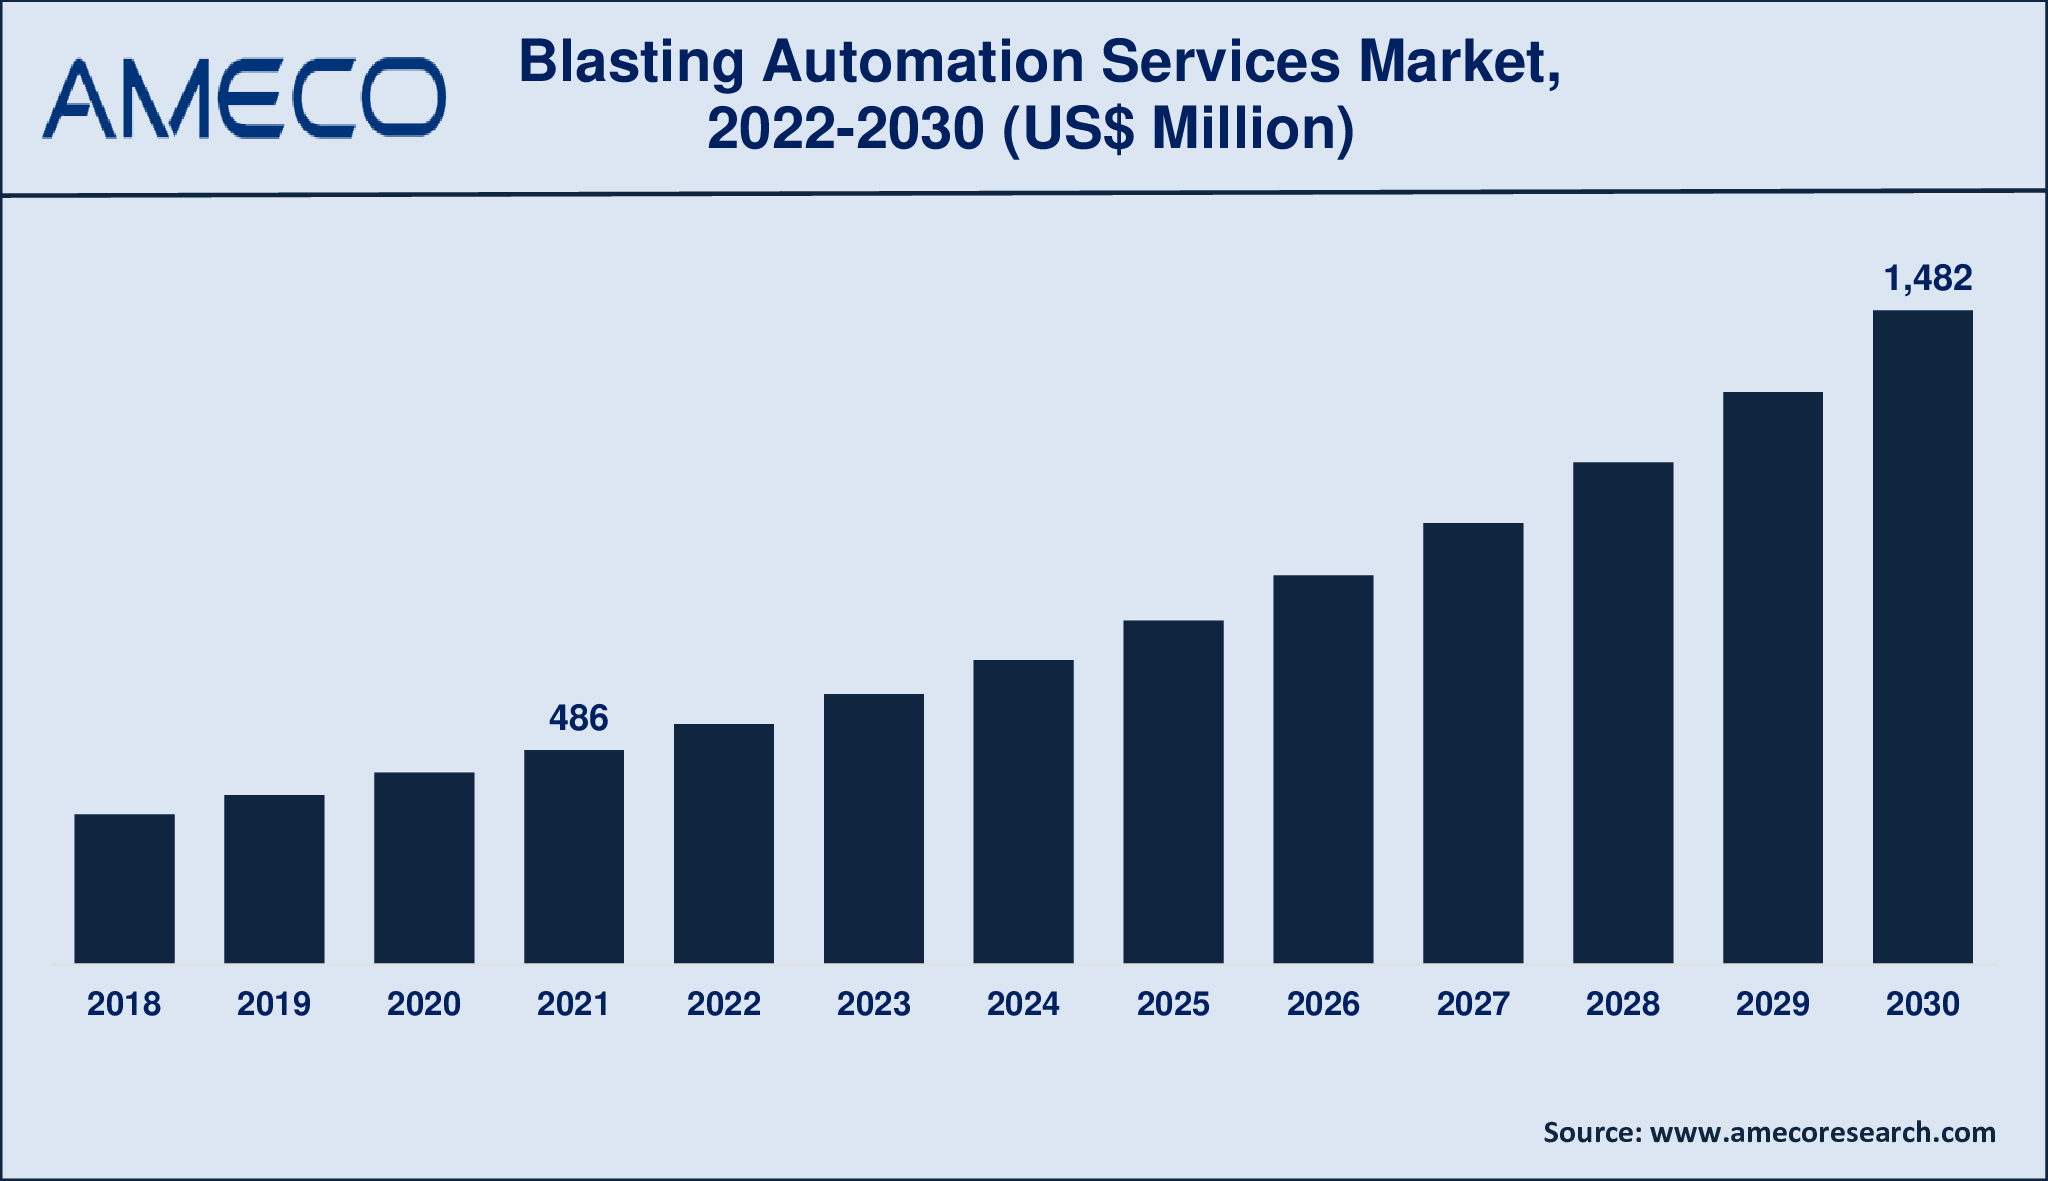 Blasting Automation Services Market Size, Share, Growth, Trends, and Forecast 2022-2030